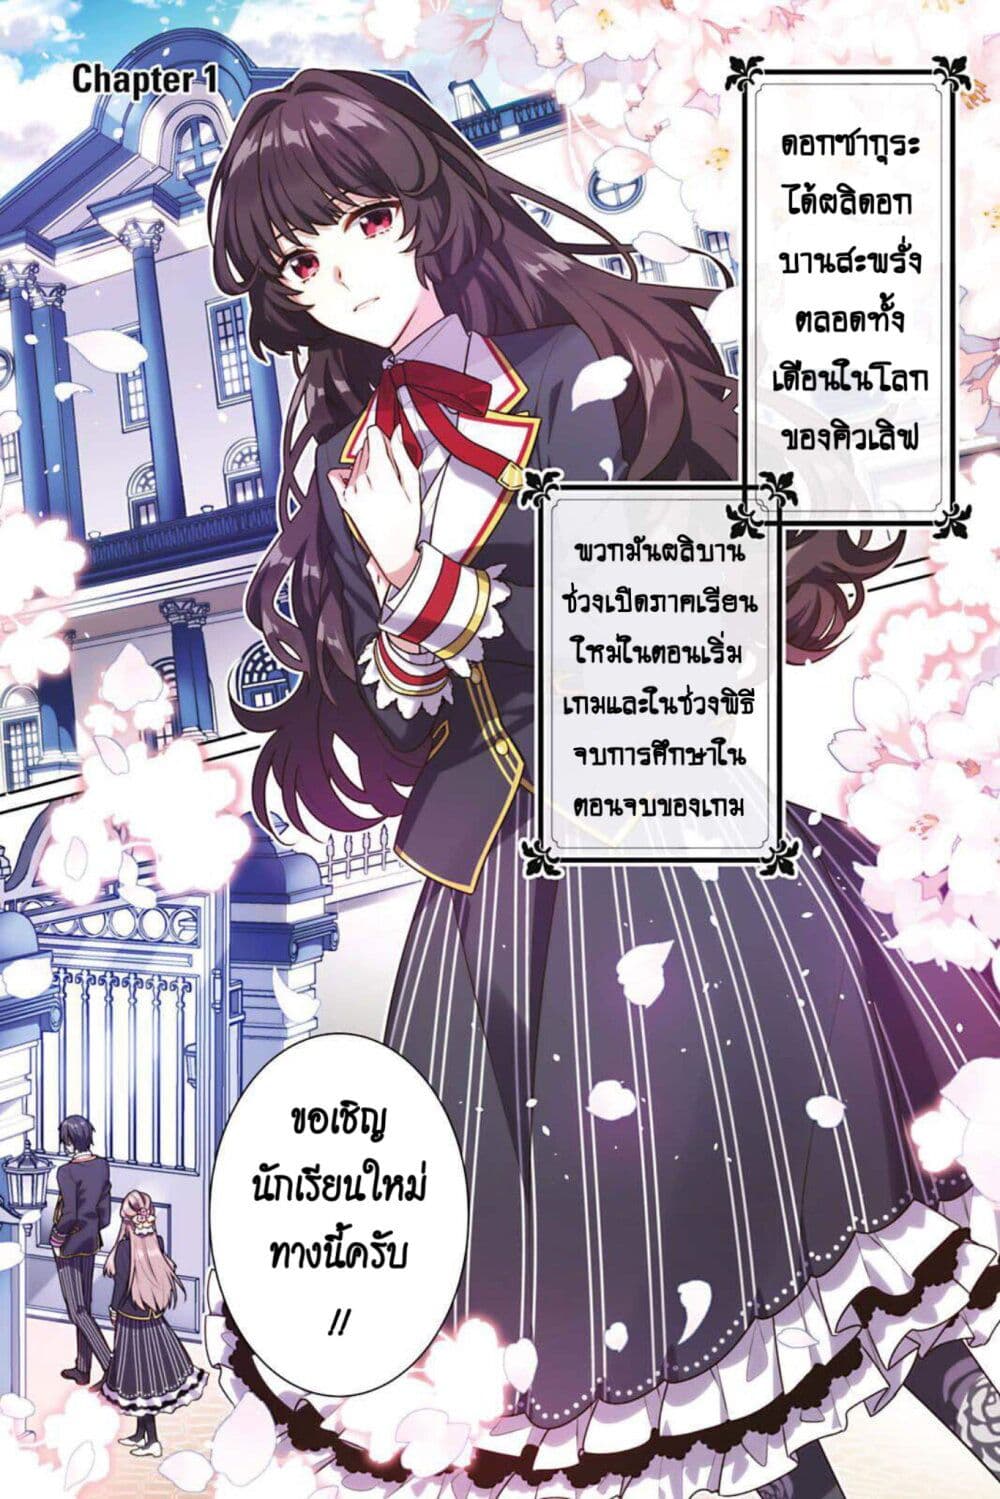 I Was Reincarnated as the Villainess in an Otome Game but the Boys Love Me Anyway! เกิดใหม่เป็นนางร้าย แต่เป้าหมายการจีบสุดจะไม่ปกติ !! 1-1